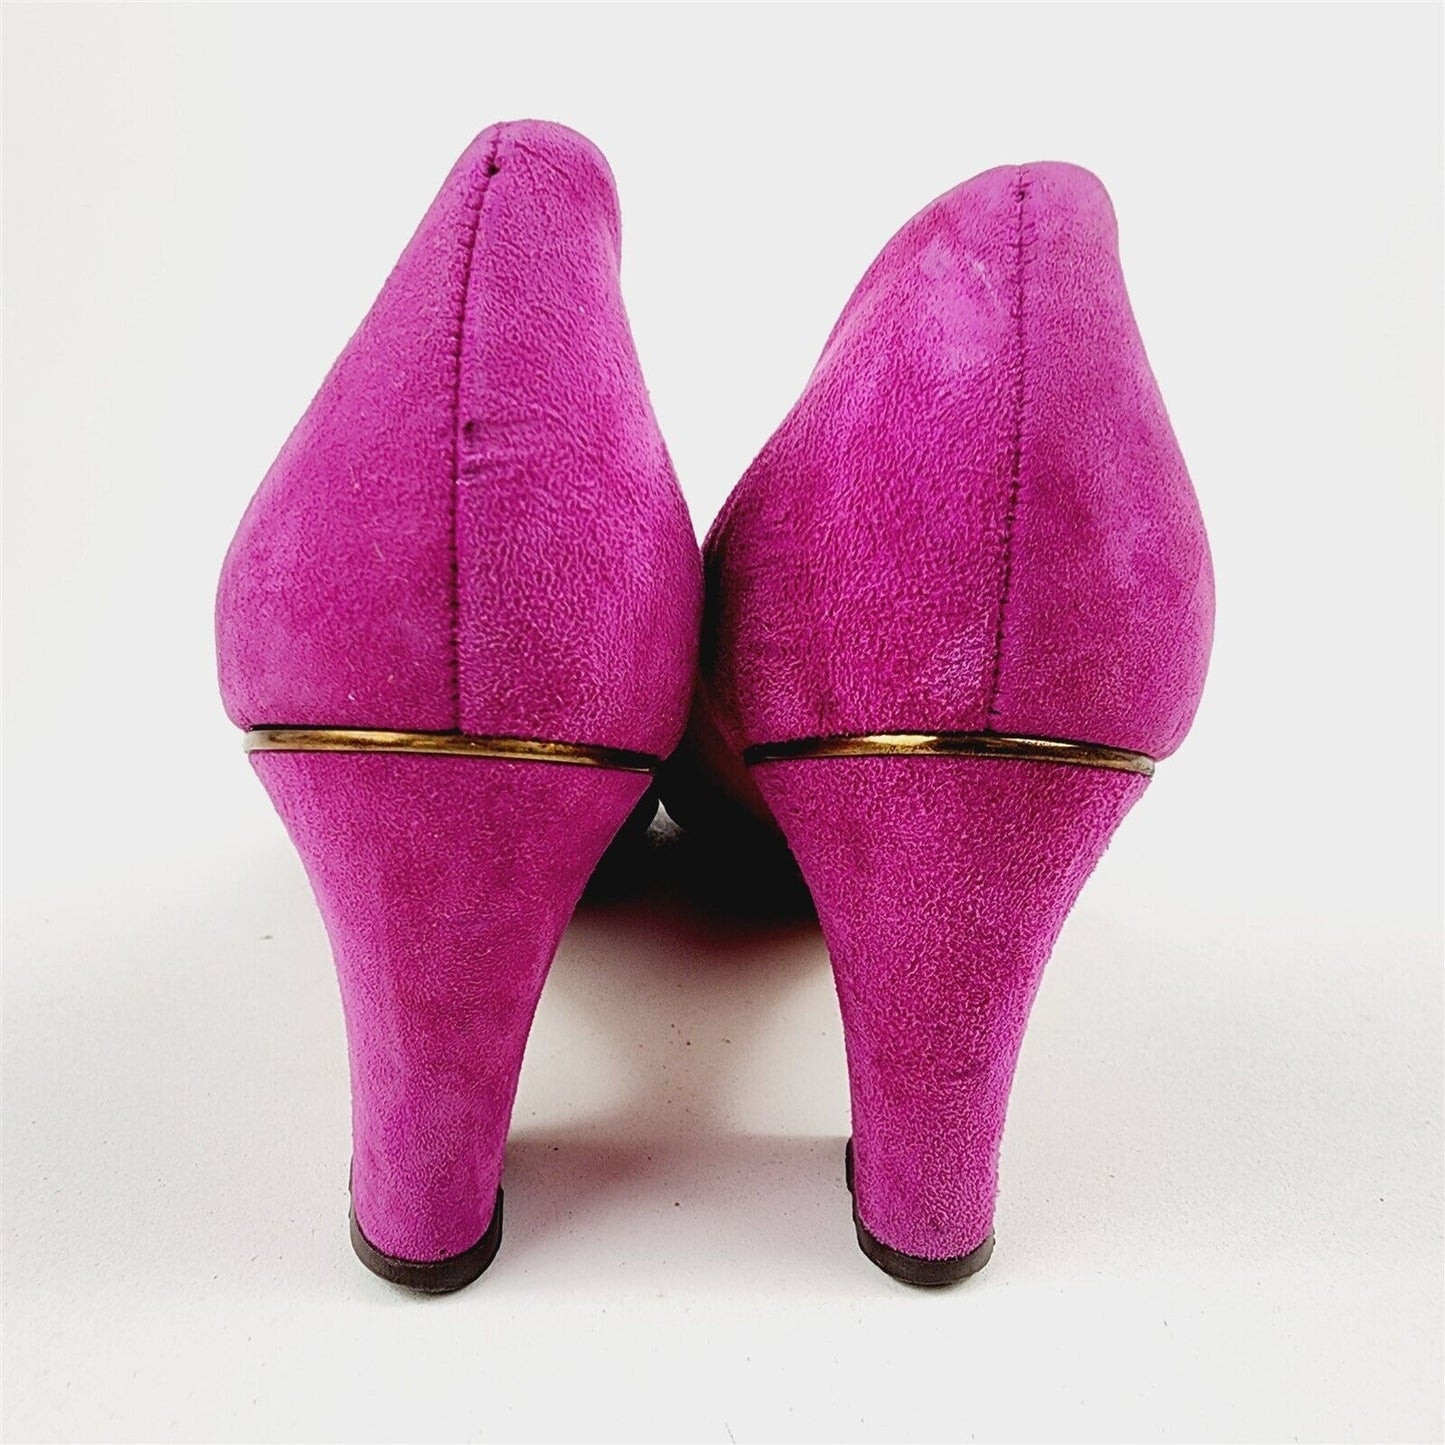 Vintage Frank More Purple Suede Leather Heels Shoes Womens Size 8.5